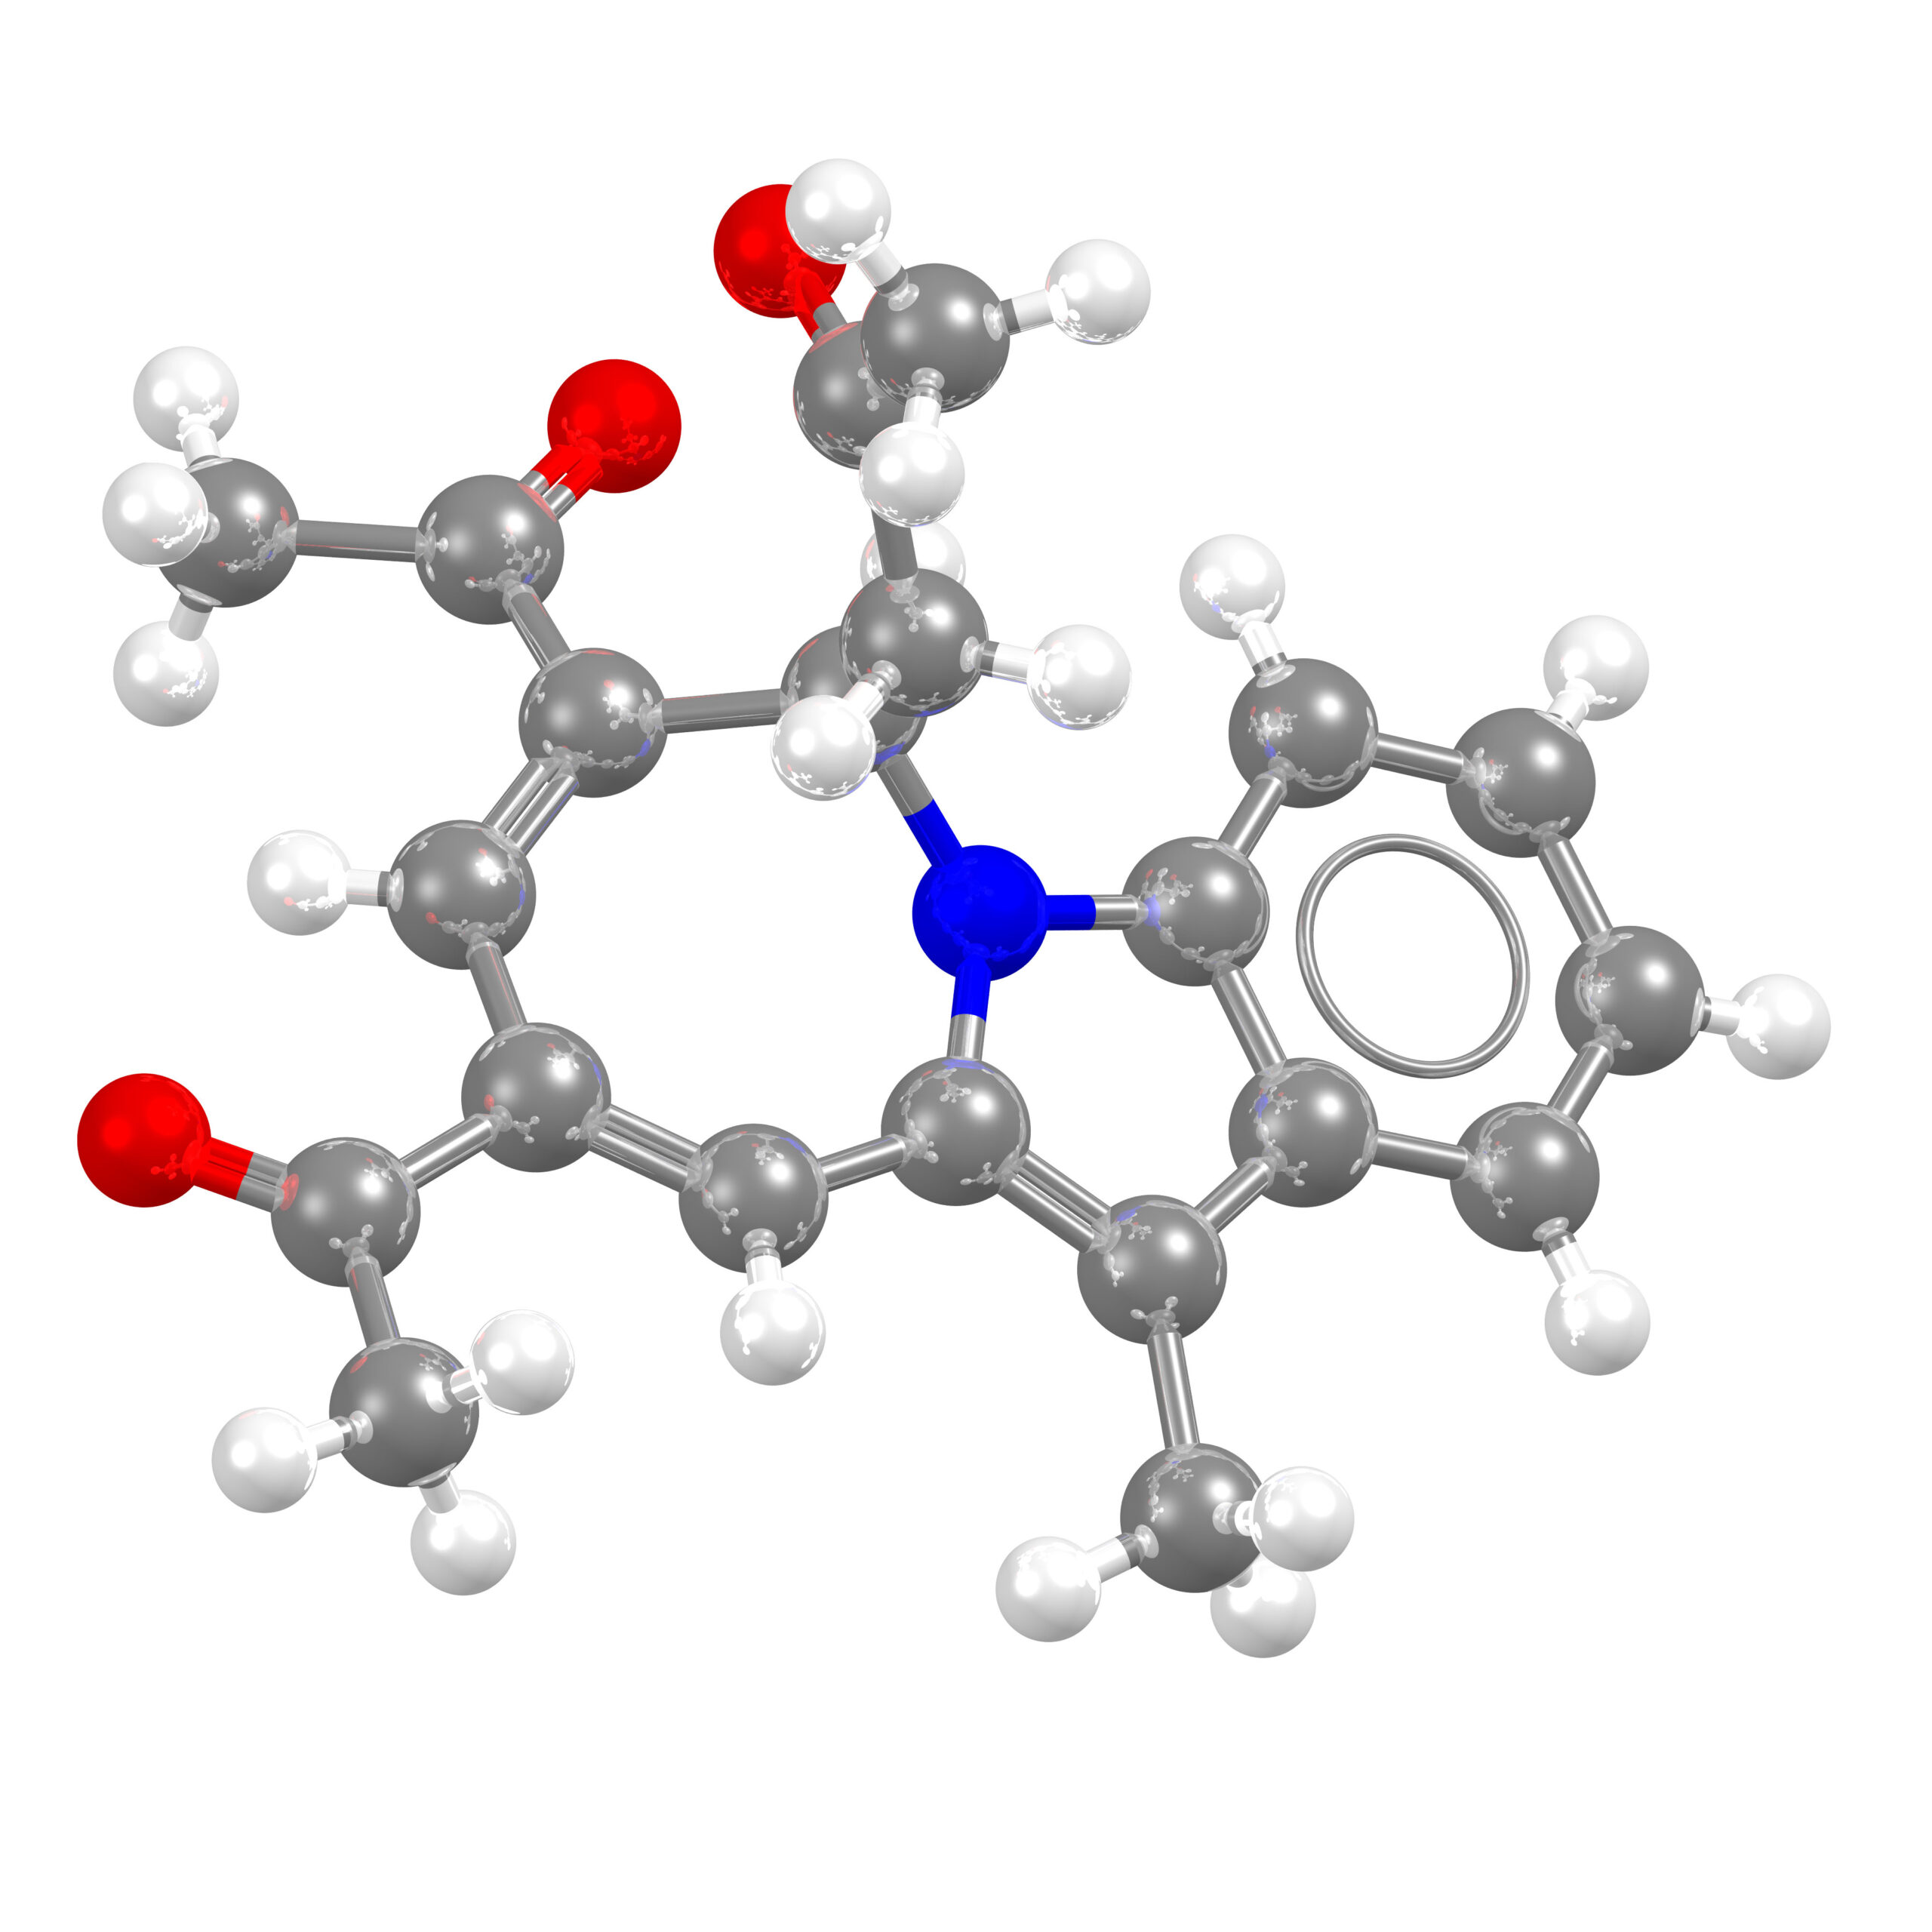 Ball and stick representation of the structure of CSD refcode XOPCAJ.